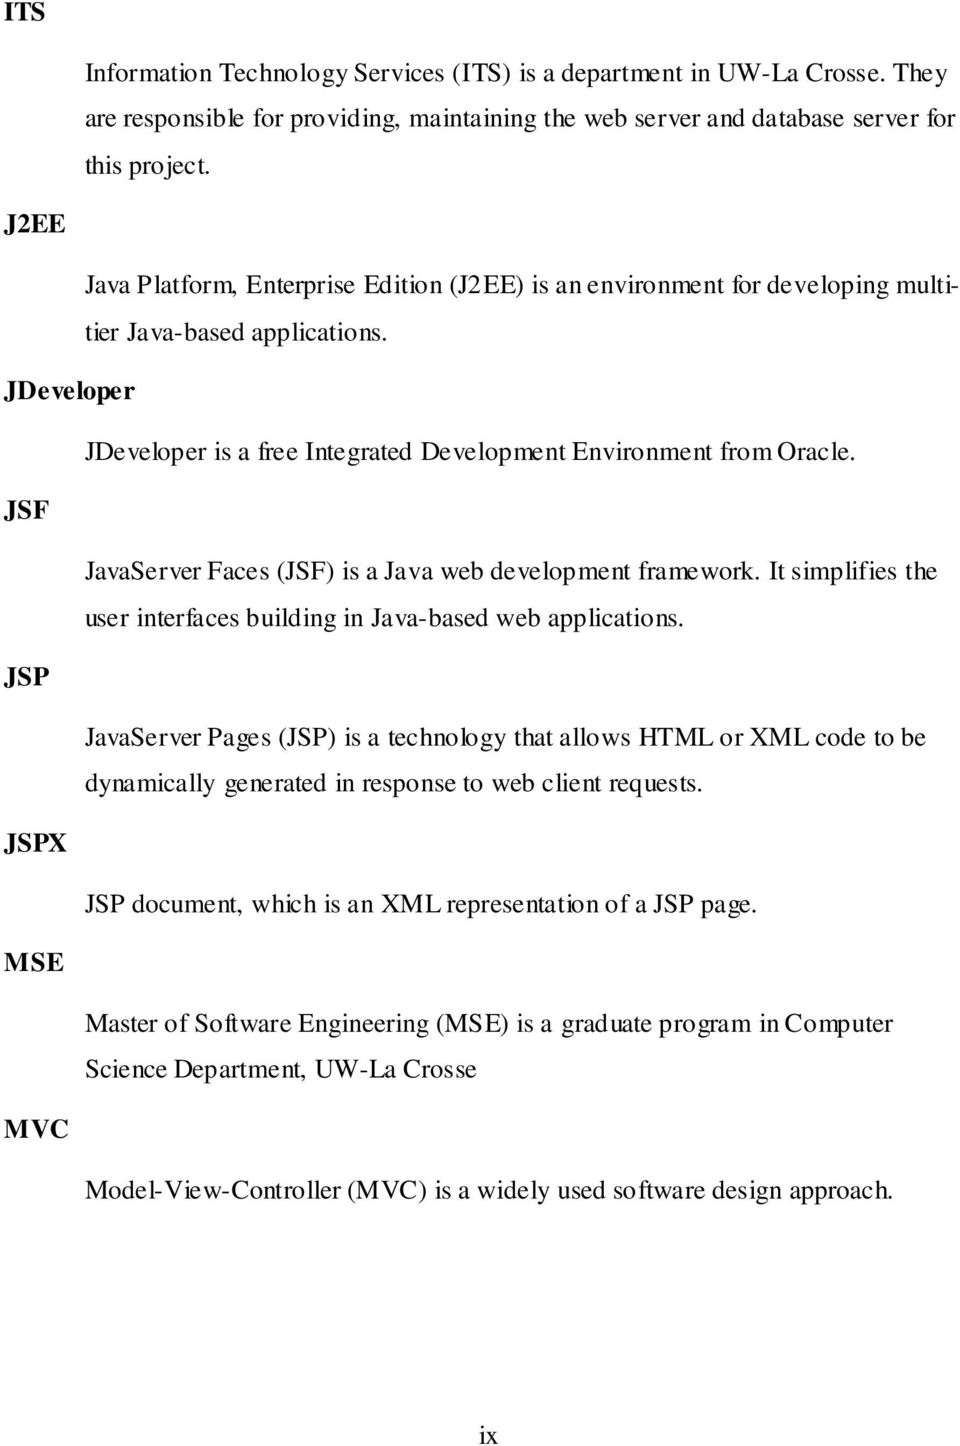 JSF JavaServer Faces (JSF) is a Java web development framework. It simplifies the user interfaces building in Java-based web applications.